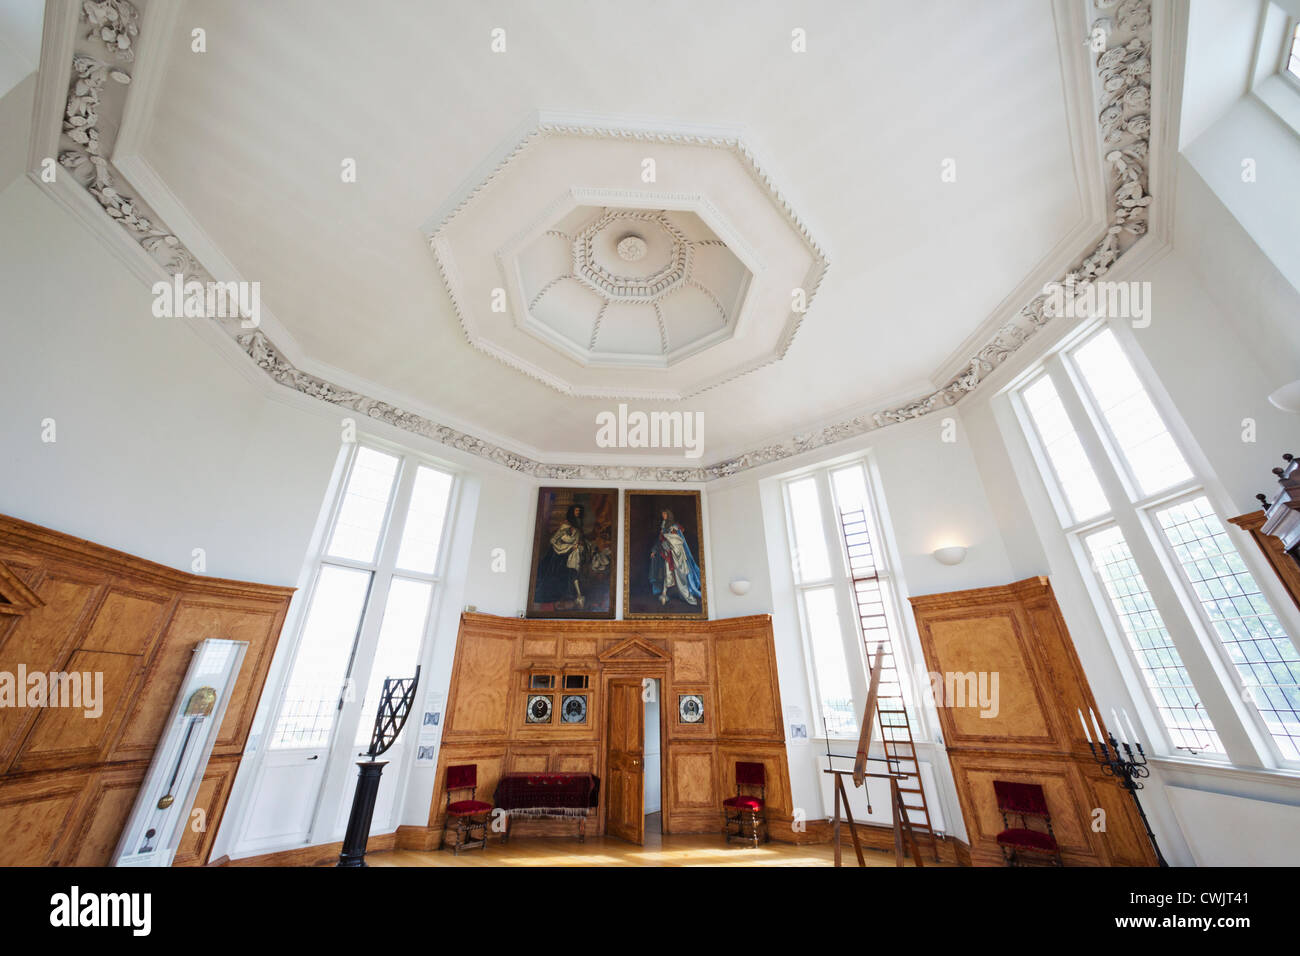 England, London, Greenwich, das Royal Observatory, Flamsteed House, das Achteck-Zimmer Stockfoto